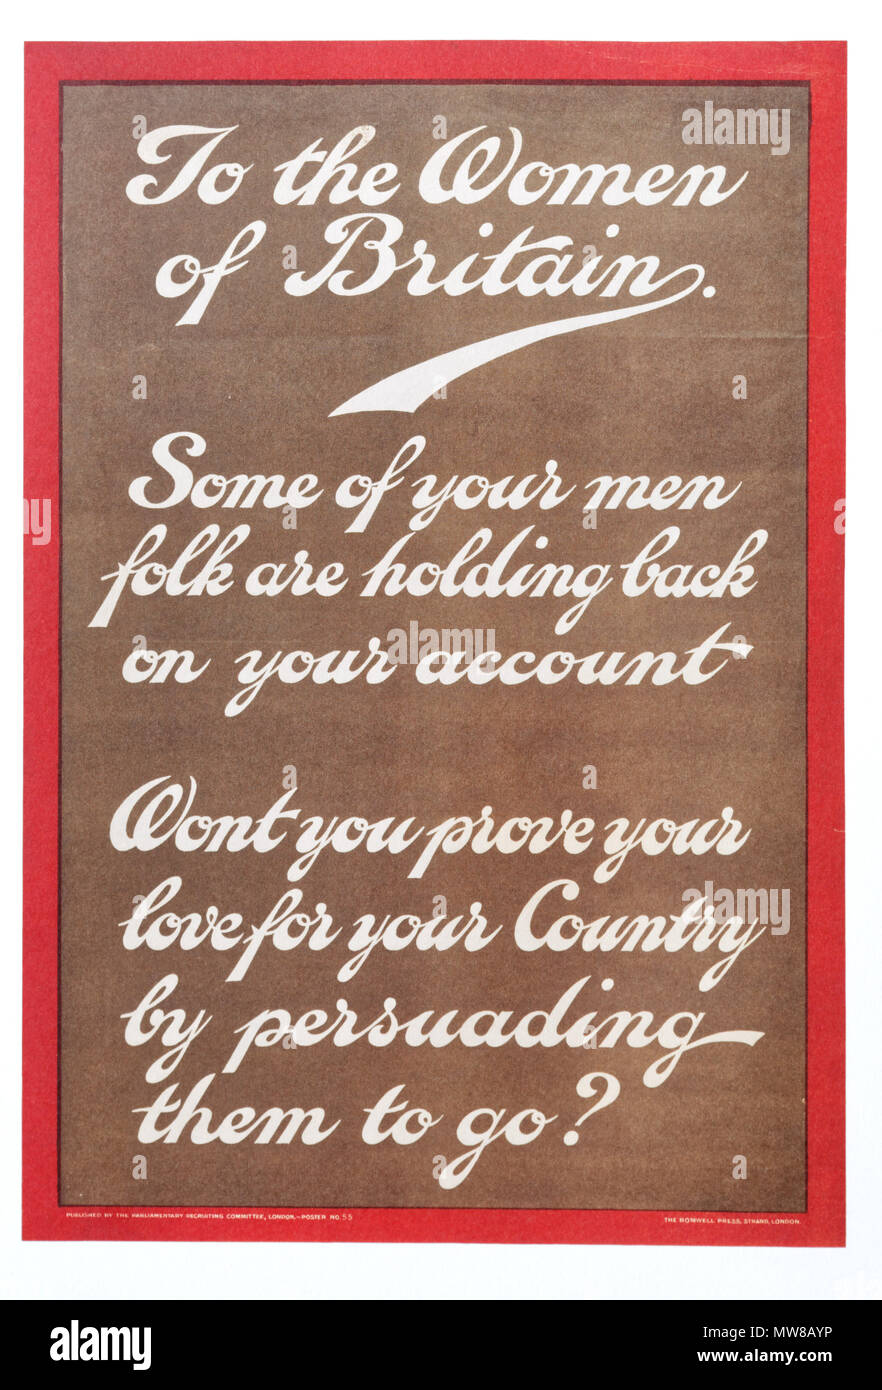 A British first world war recruitment poster aimed at women who may be persuading their menfolk to stay at home Stock Photo